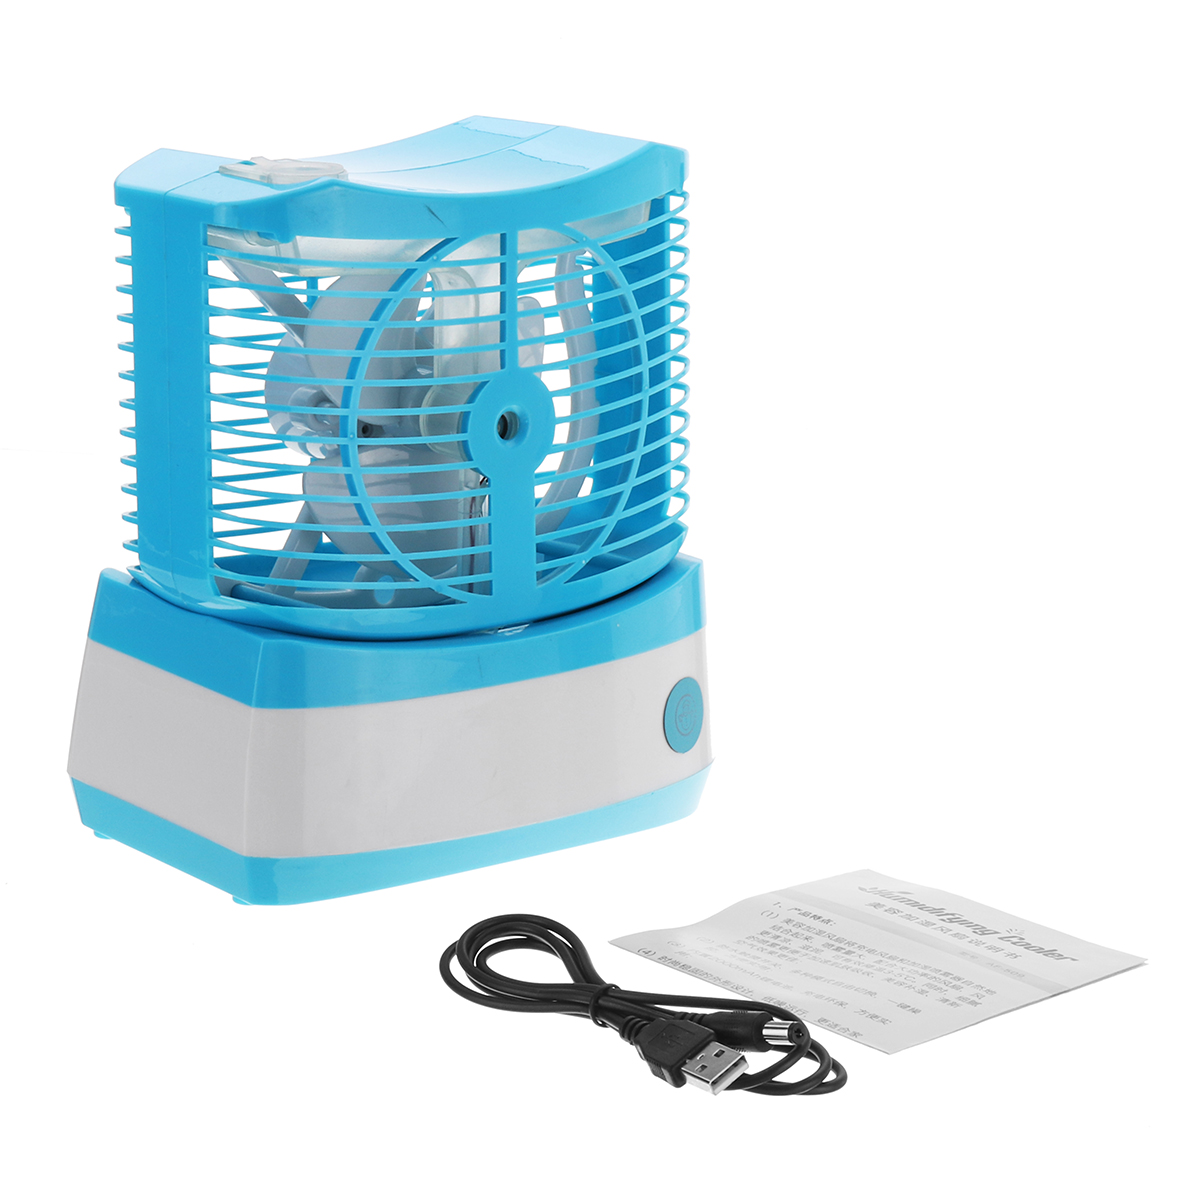 USB-Portable-Mini-ABS-Fan-Cooling-Desktop-Air-Conditioner-Fan-Humidified-Foggy-1419352-8